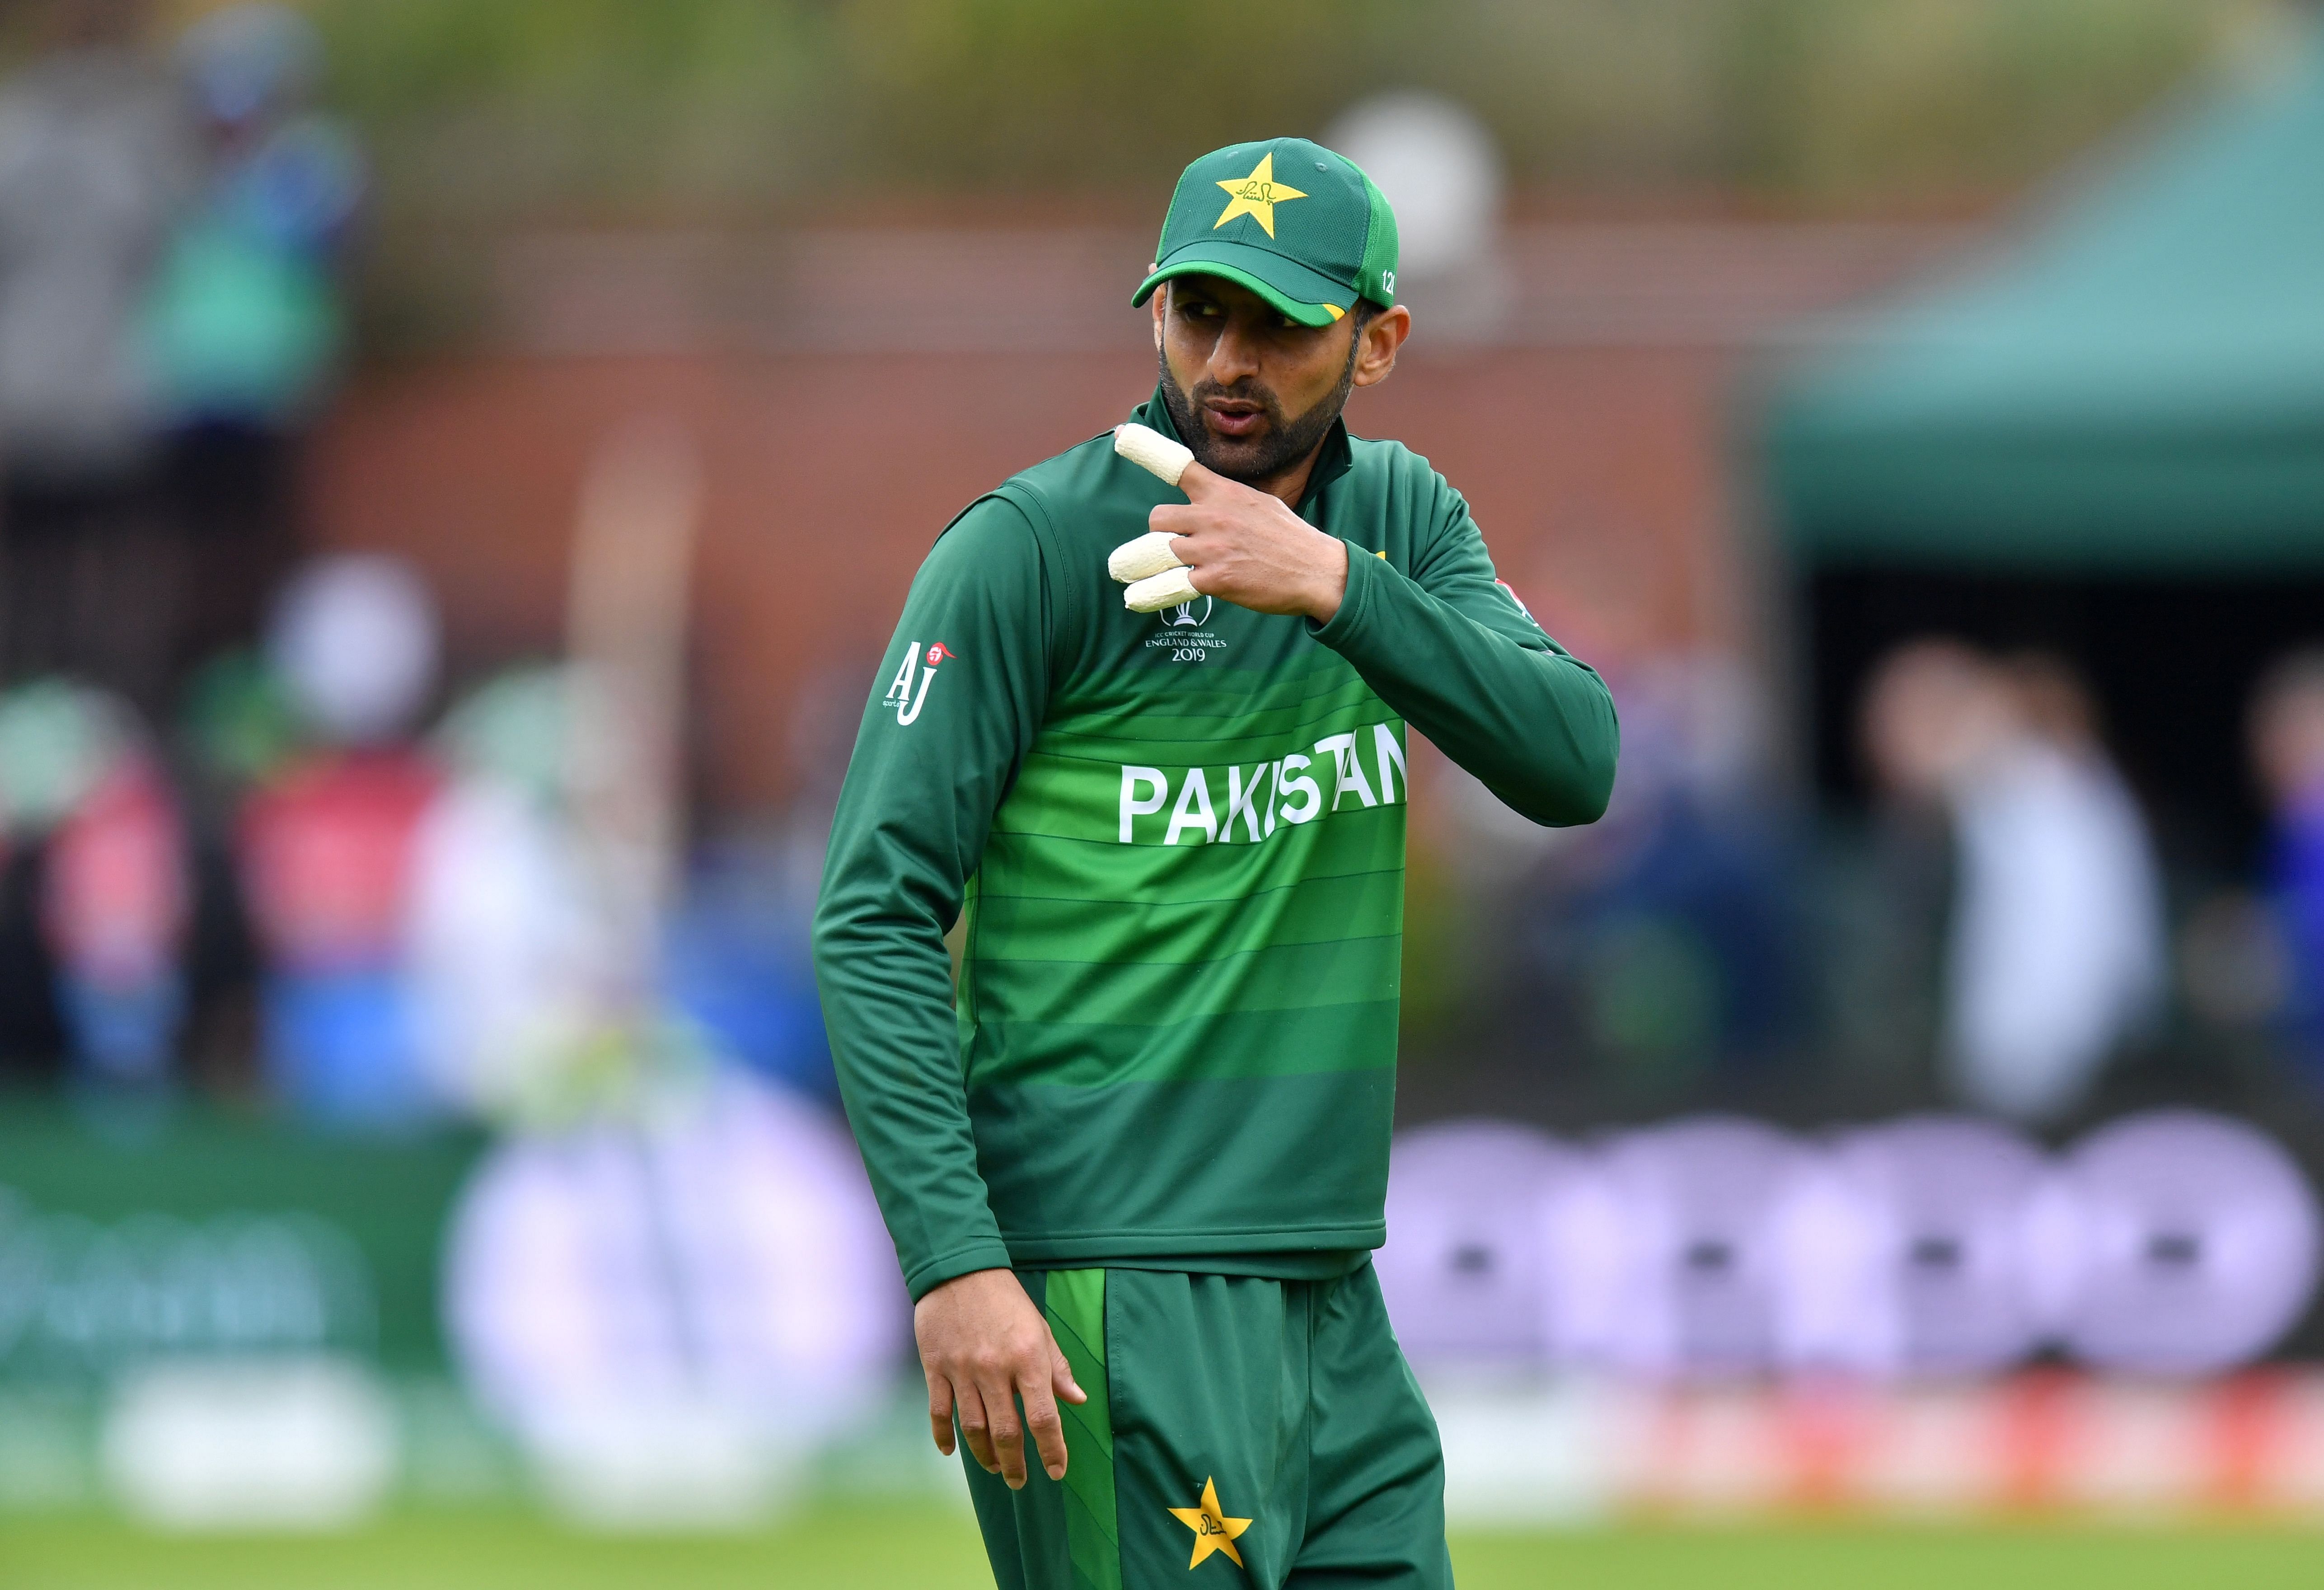 Pakistan's Shoaib Malik gestures during the 2019 Cricket World Cup group stage match between Australia and Pakistan at The County Ground in Taunton, southwest England. (AFP Photo)